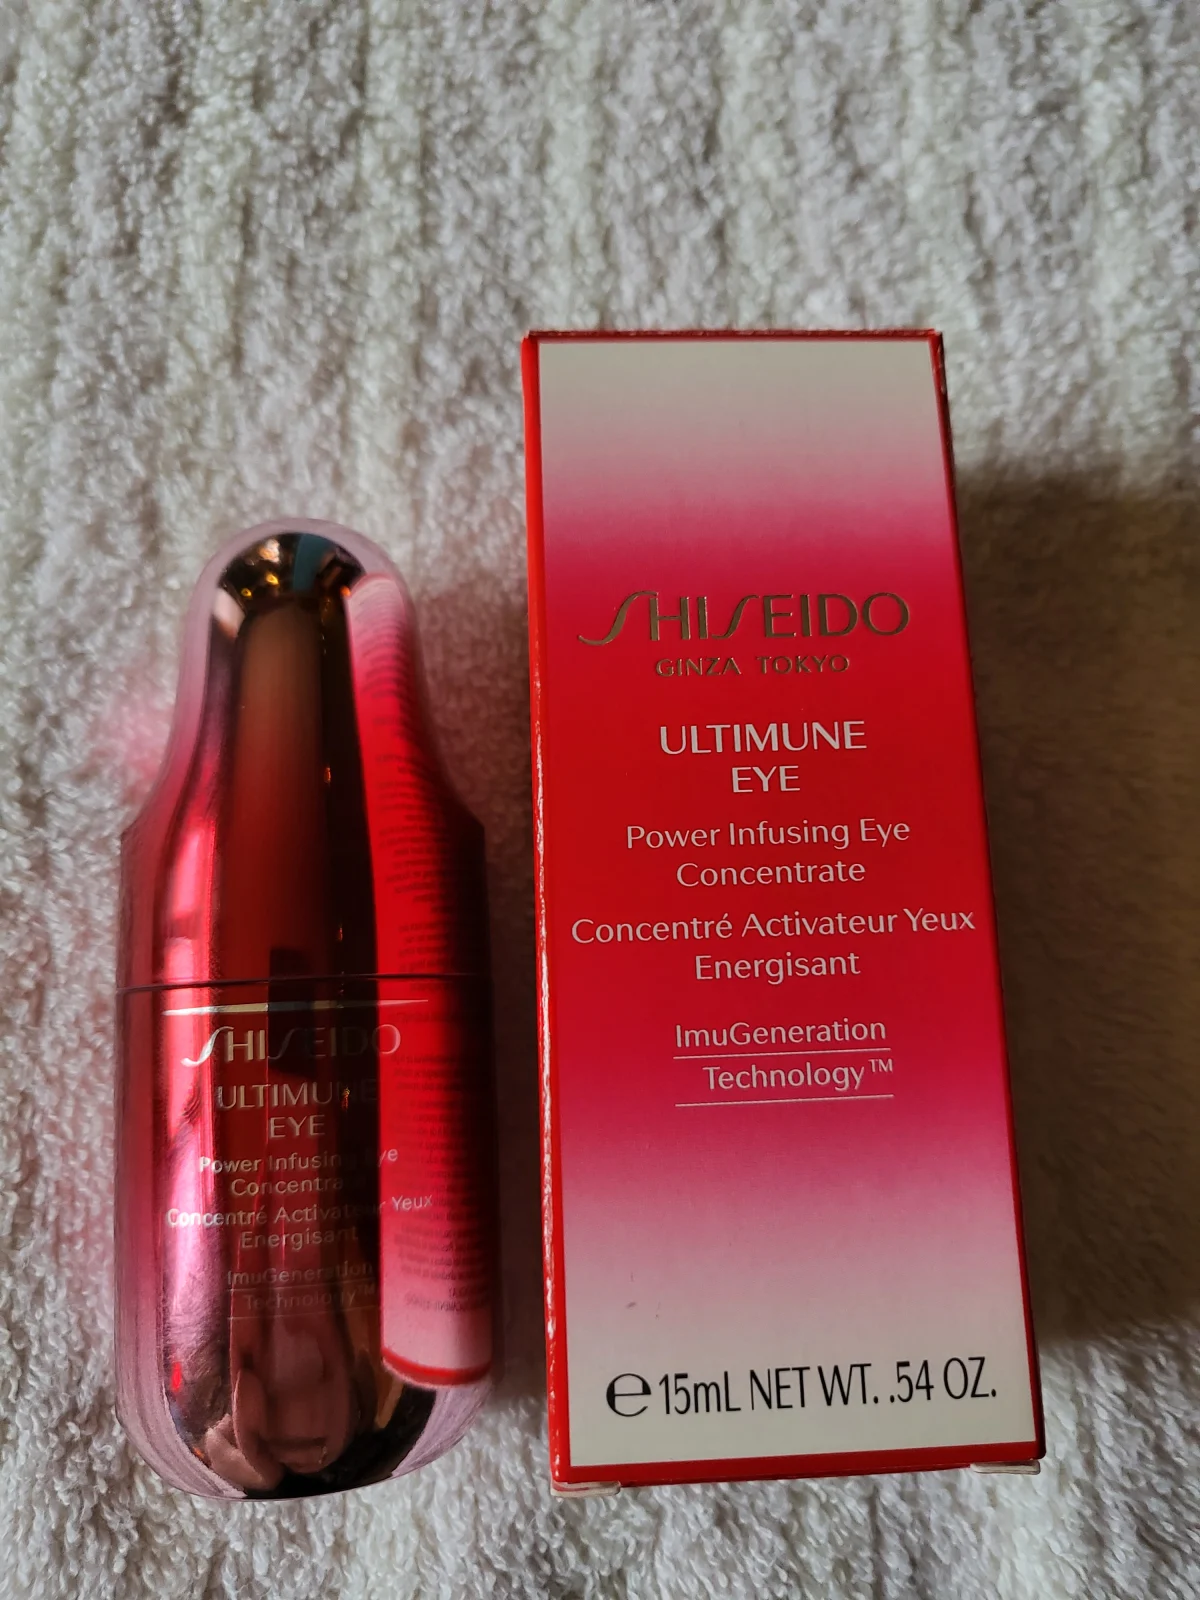 Shiseido Eye Power Infusing Eye Concentrate Shiseido - Ultimune Eye Power Infusing Eye Concentrate - review image